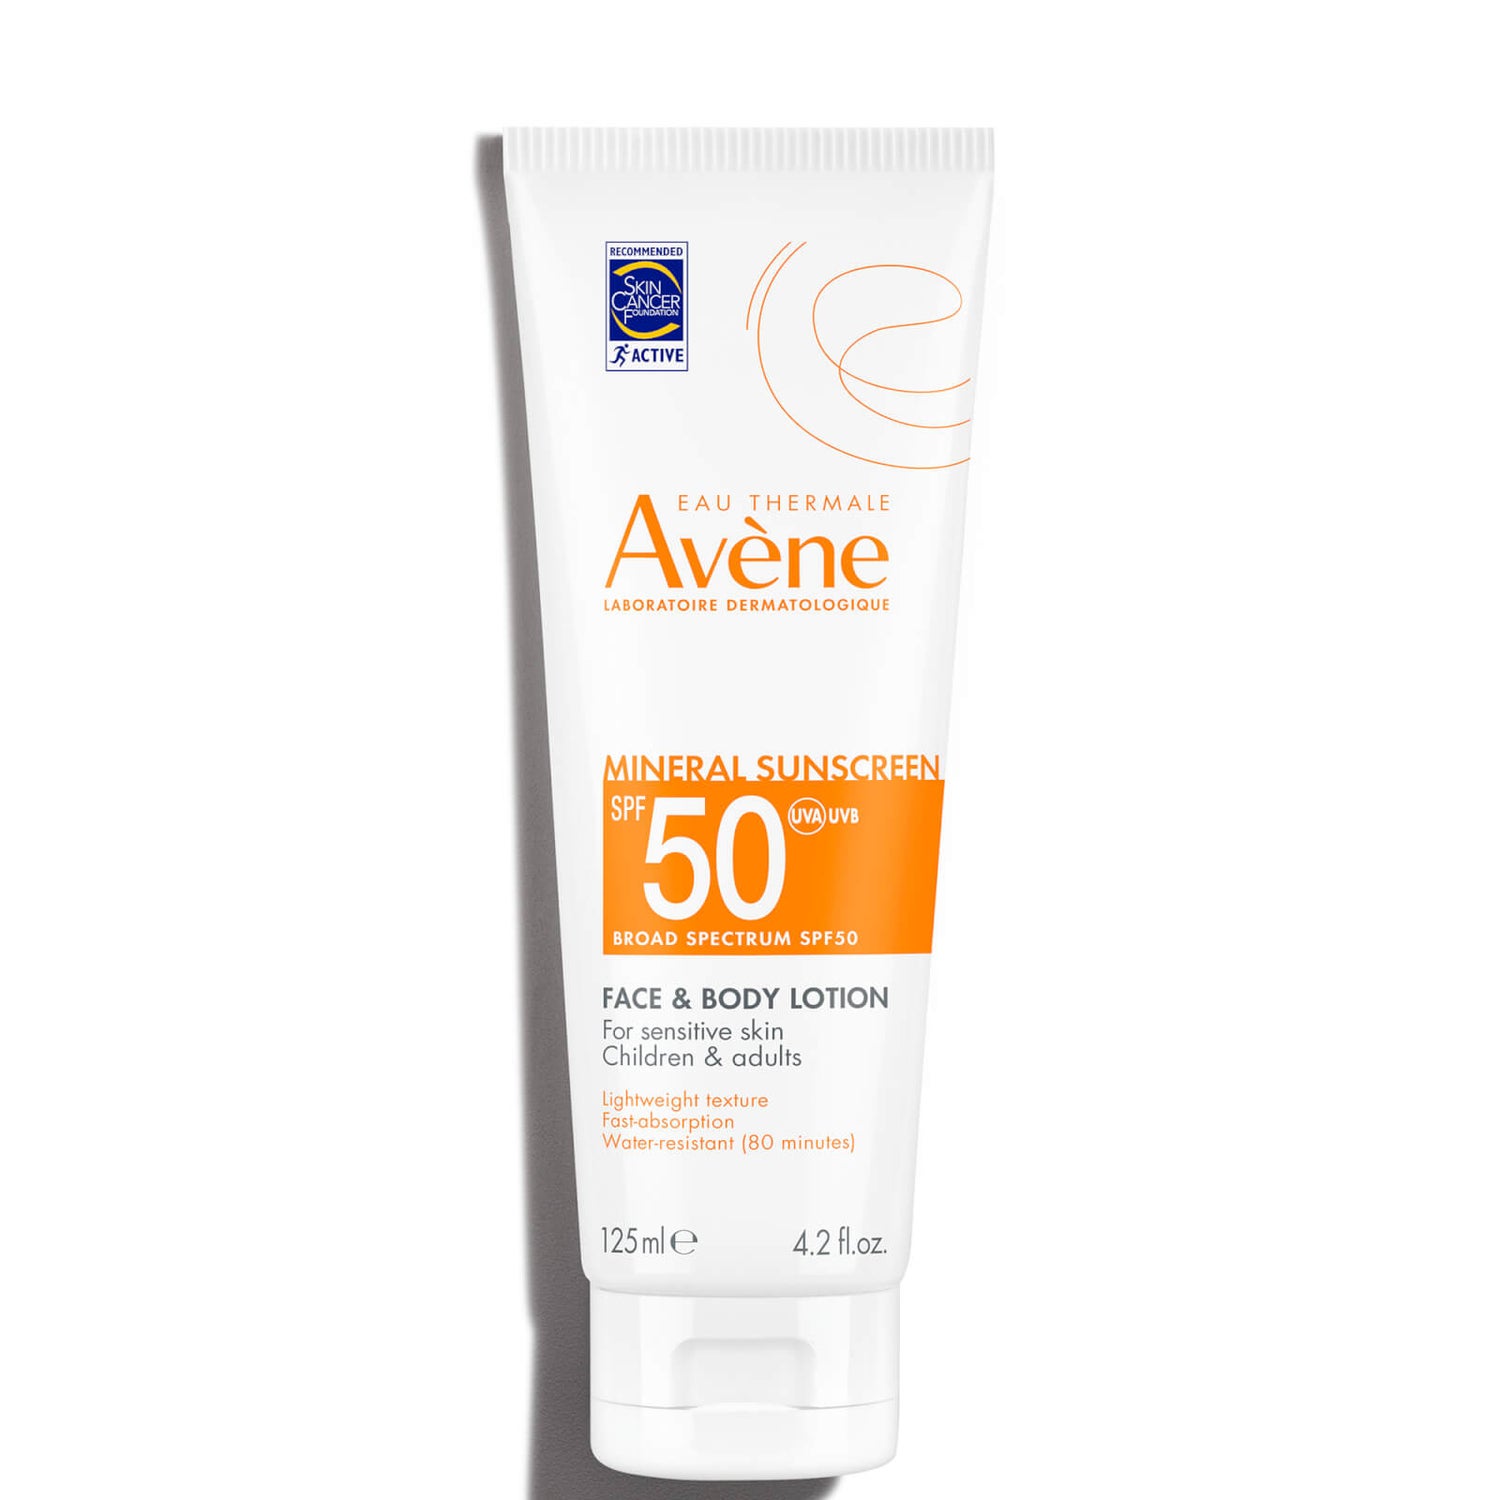 Avène Mineral Sunscreen Broad Spectrum SPF 50 Face and Body Lotion 4.2 fl. oz